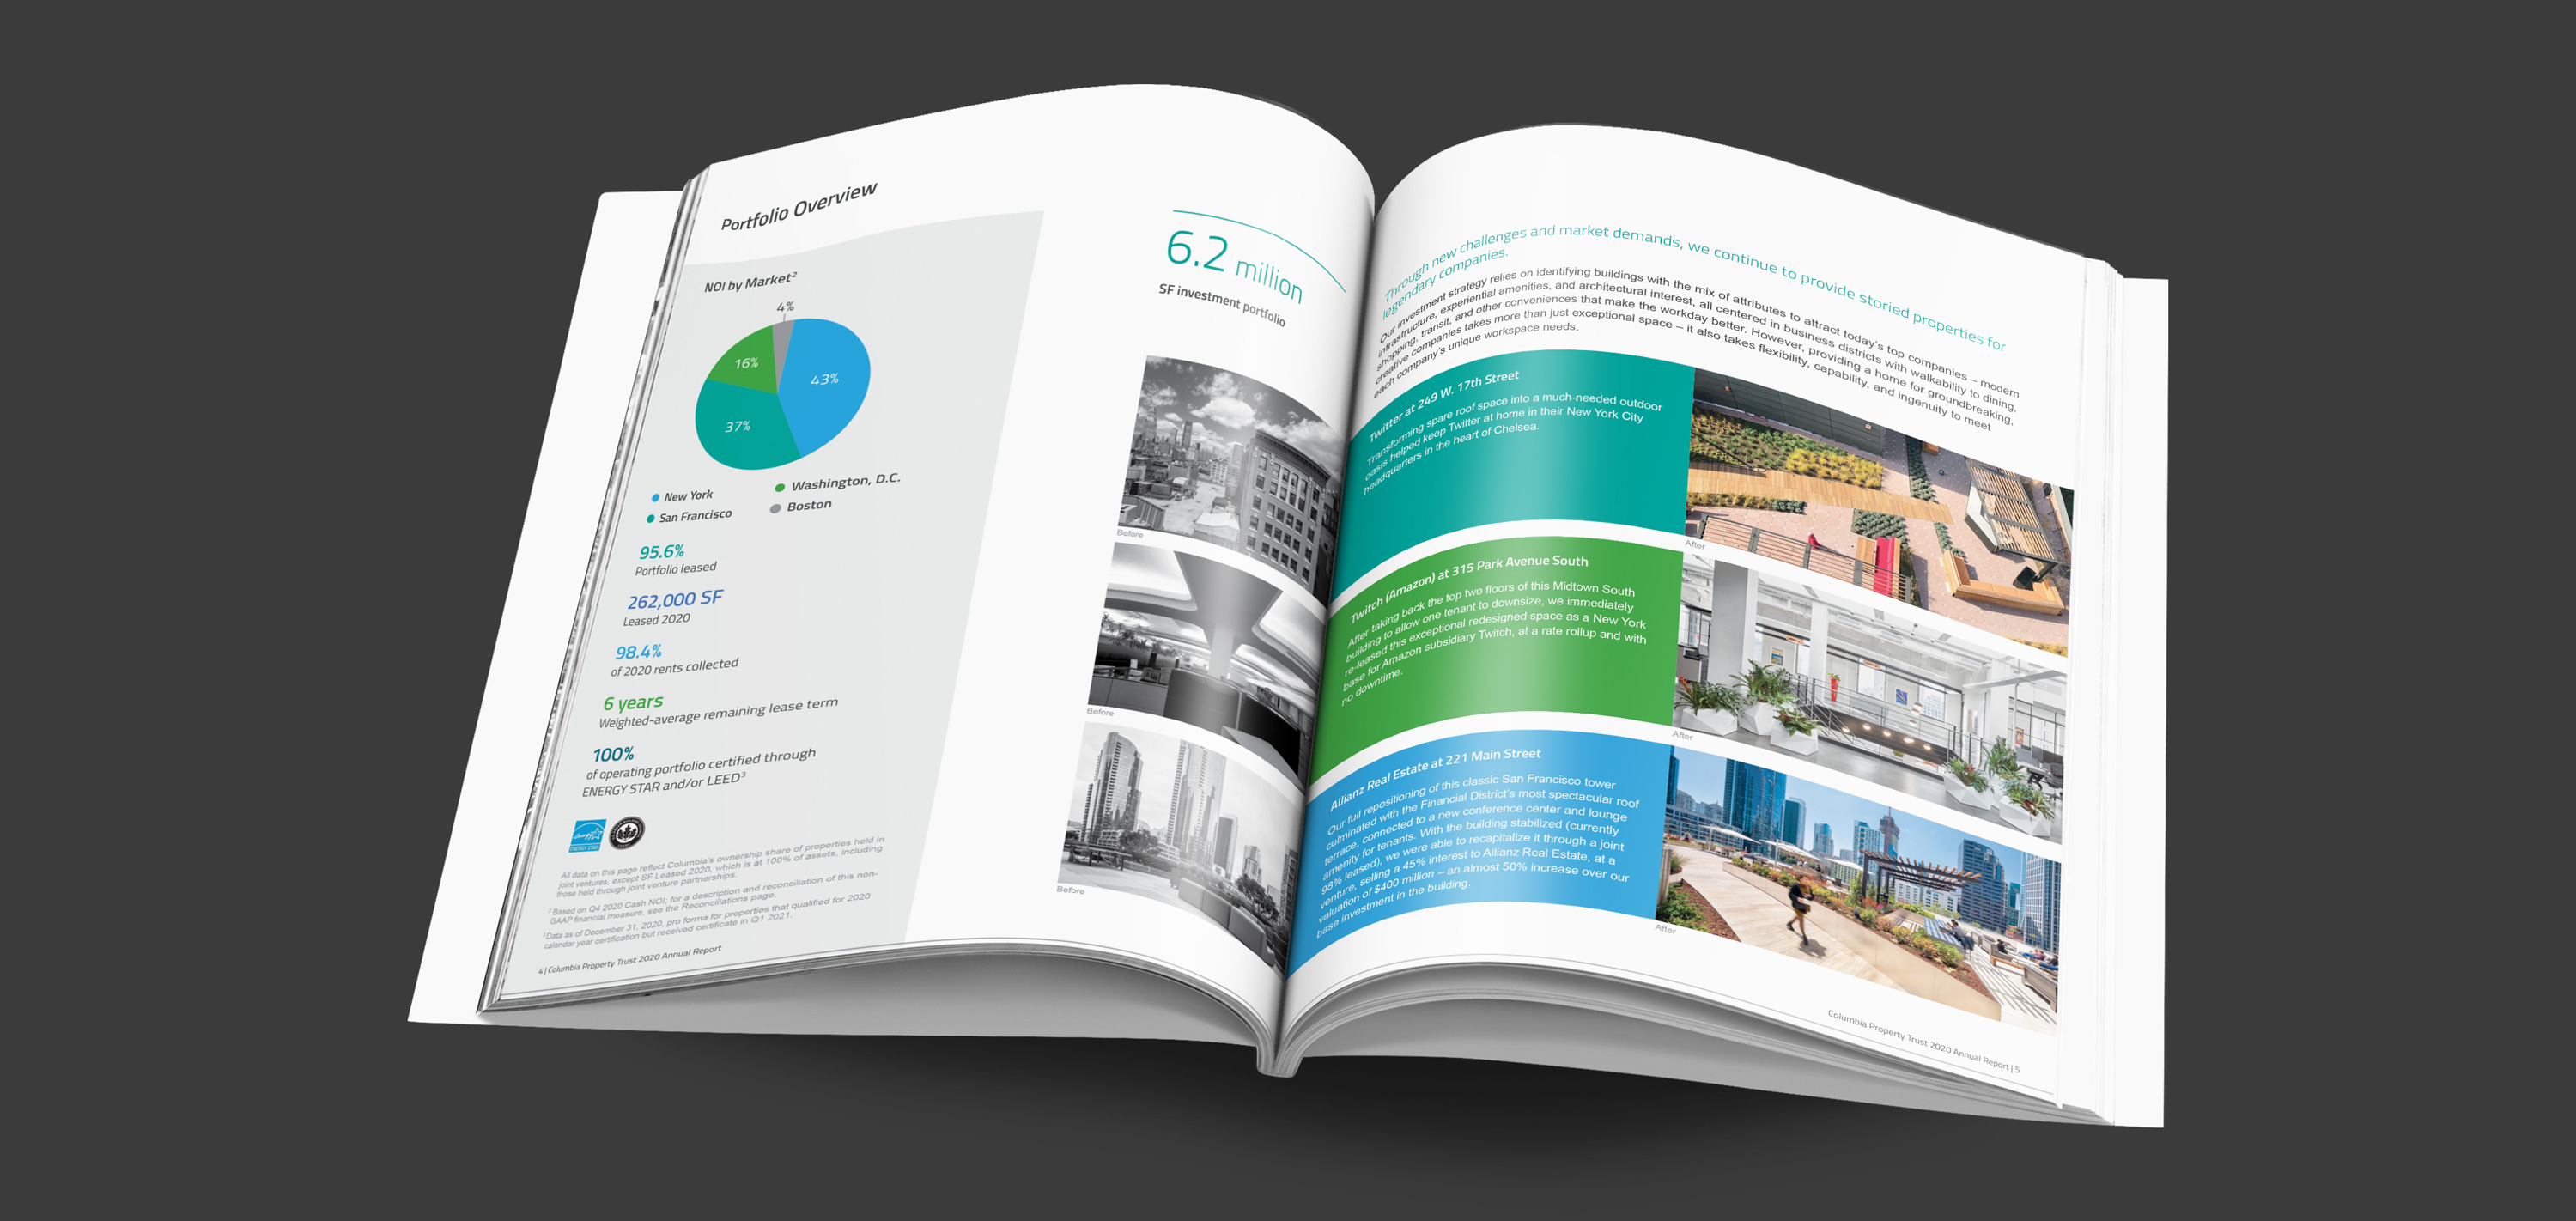 page turn animation of CXP annual report spreads